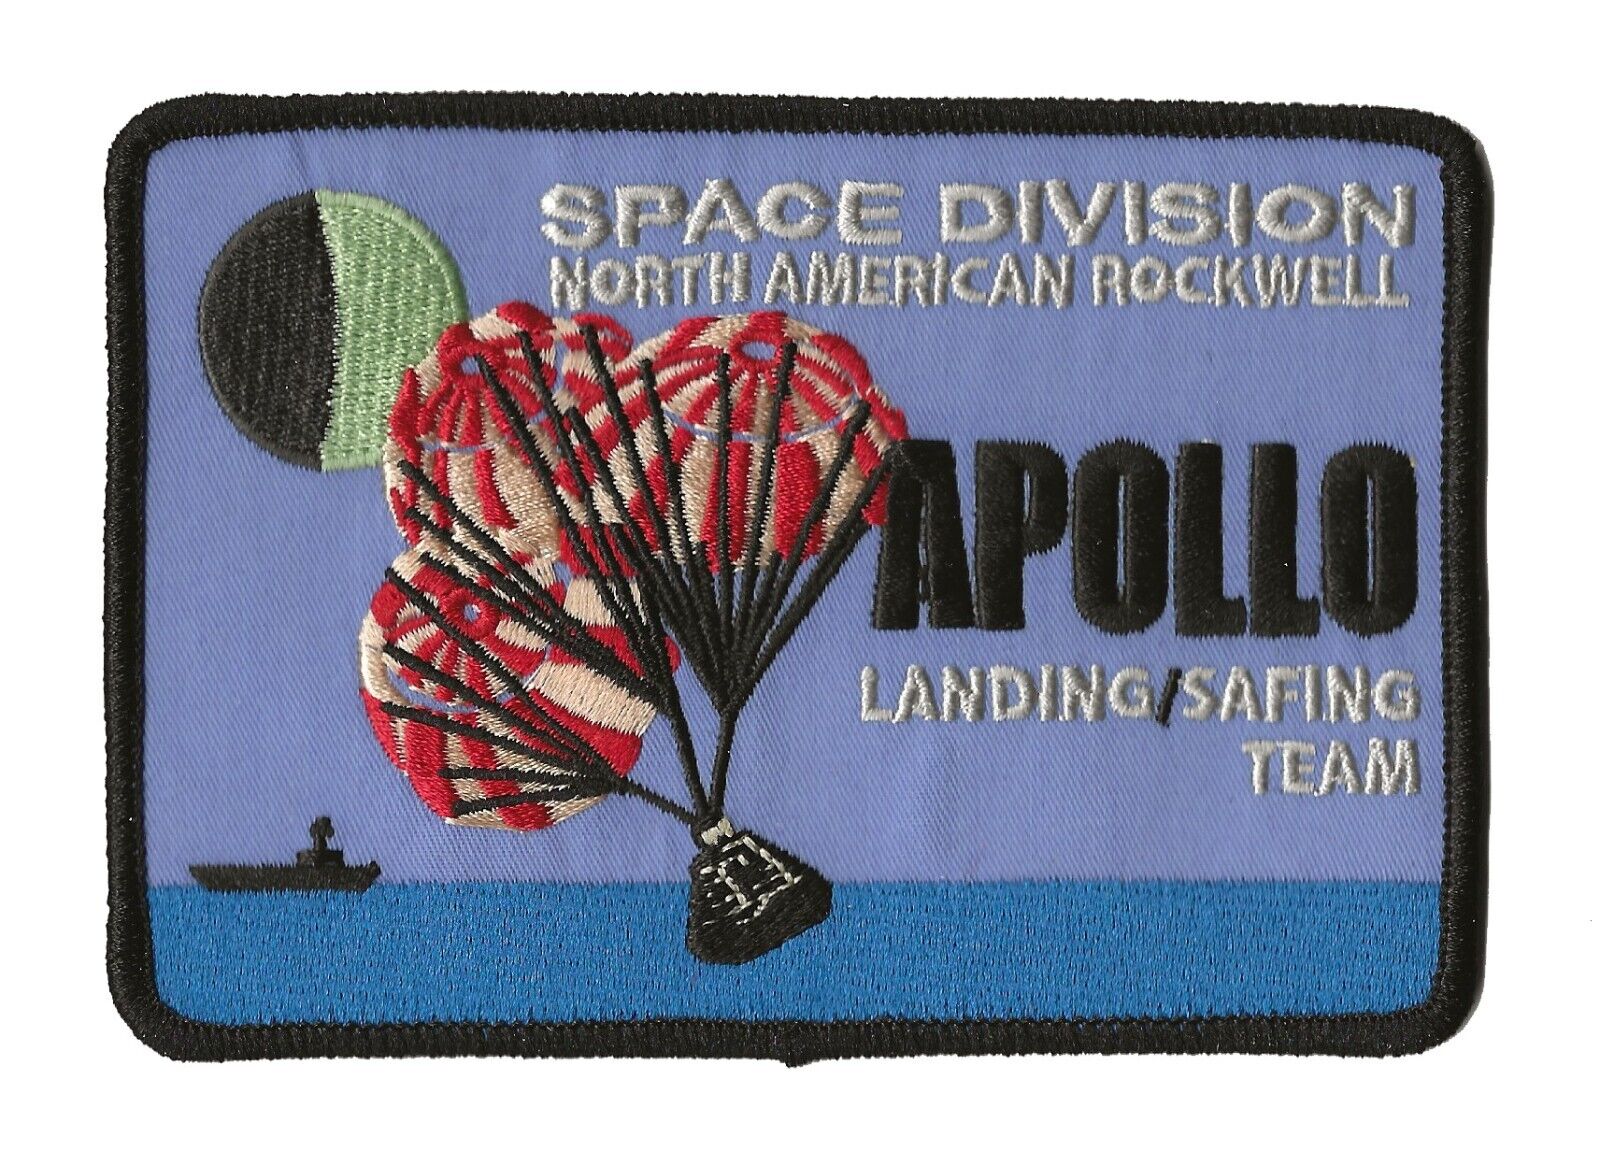 North American Rockwell Apollo Landing Safing NASA space program recovery patch